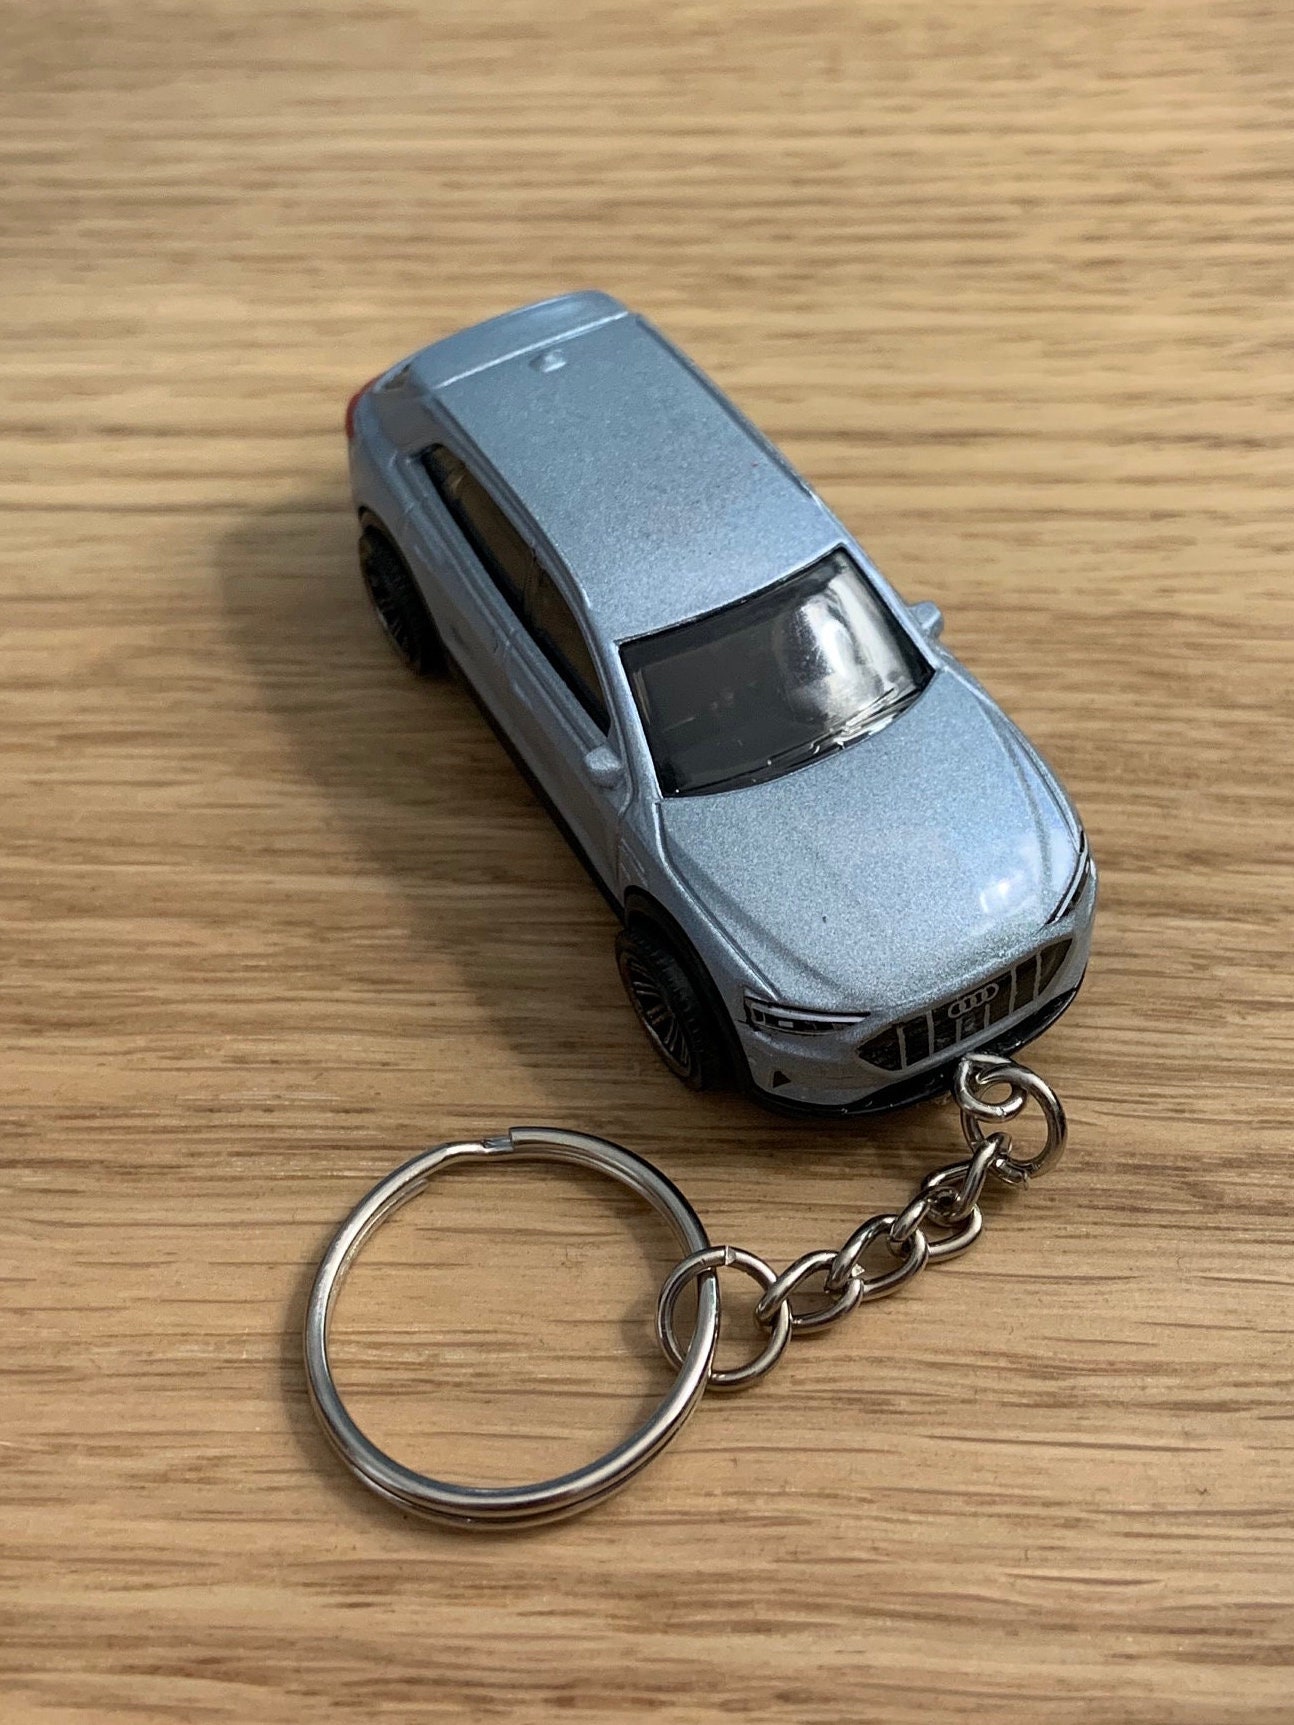 Cute and Safe audi plush car toys, Perfect for Gifting 